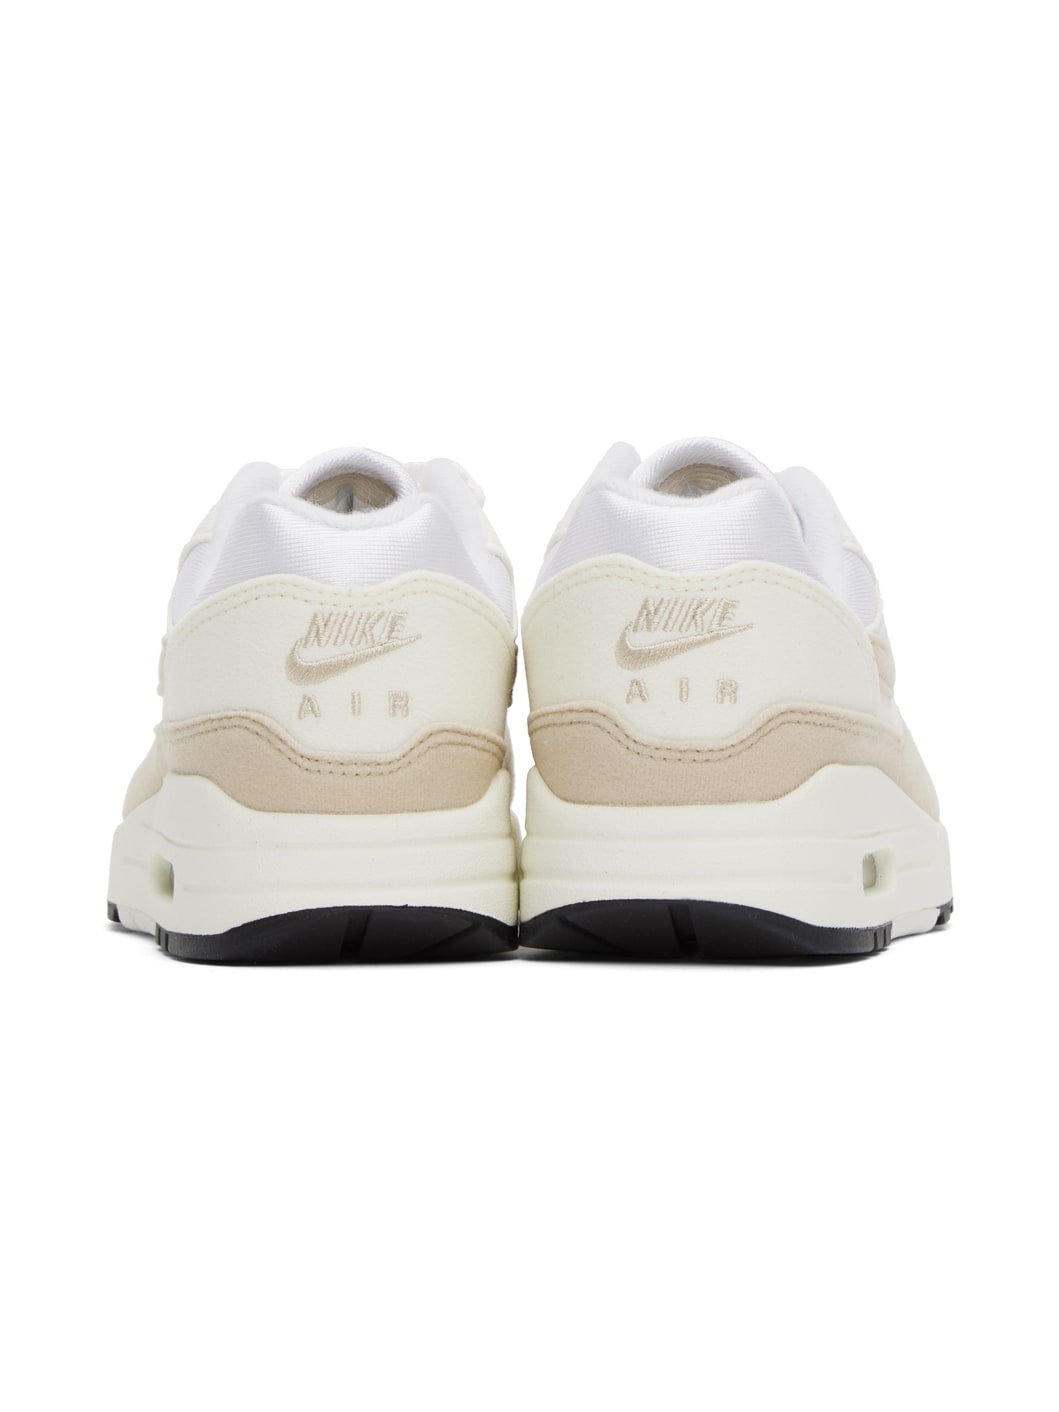 White & Beige Air Max 1 Sneakers - 2